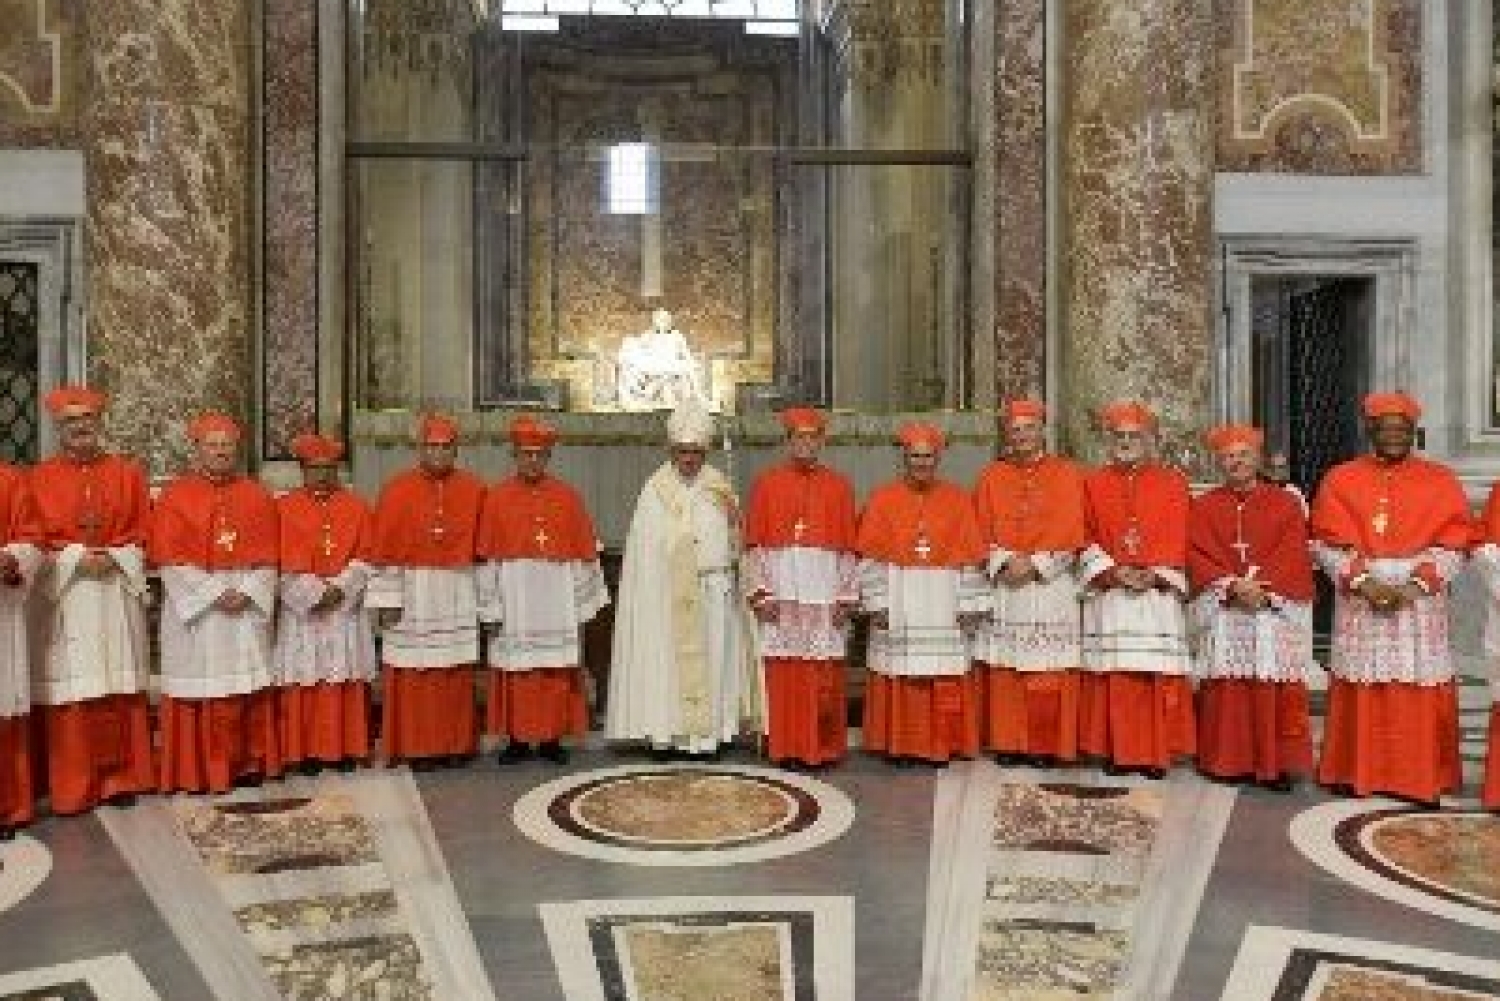 New Cardinals come from all corners of the earth